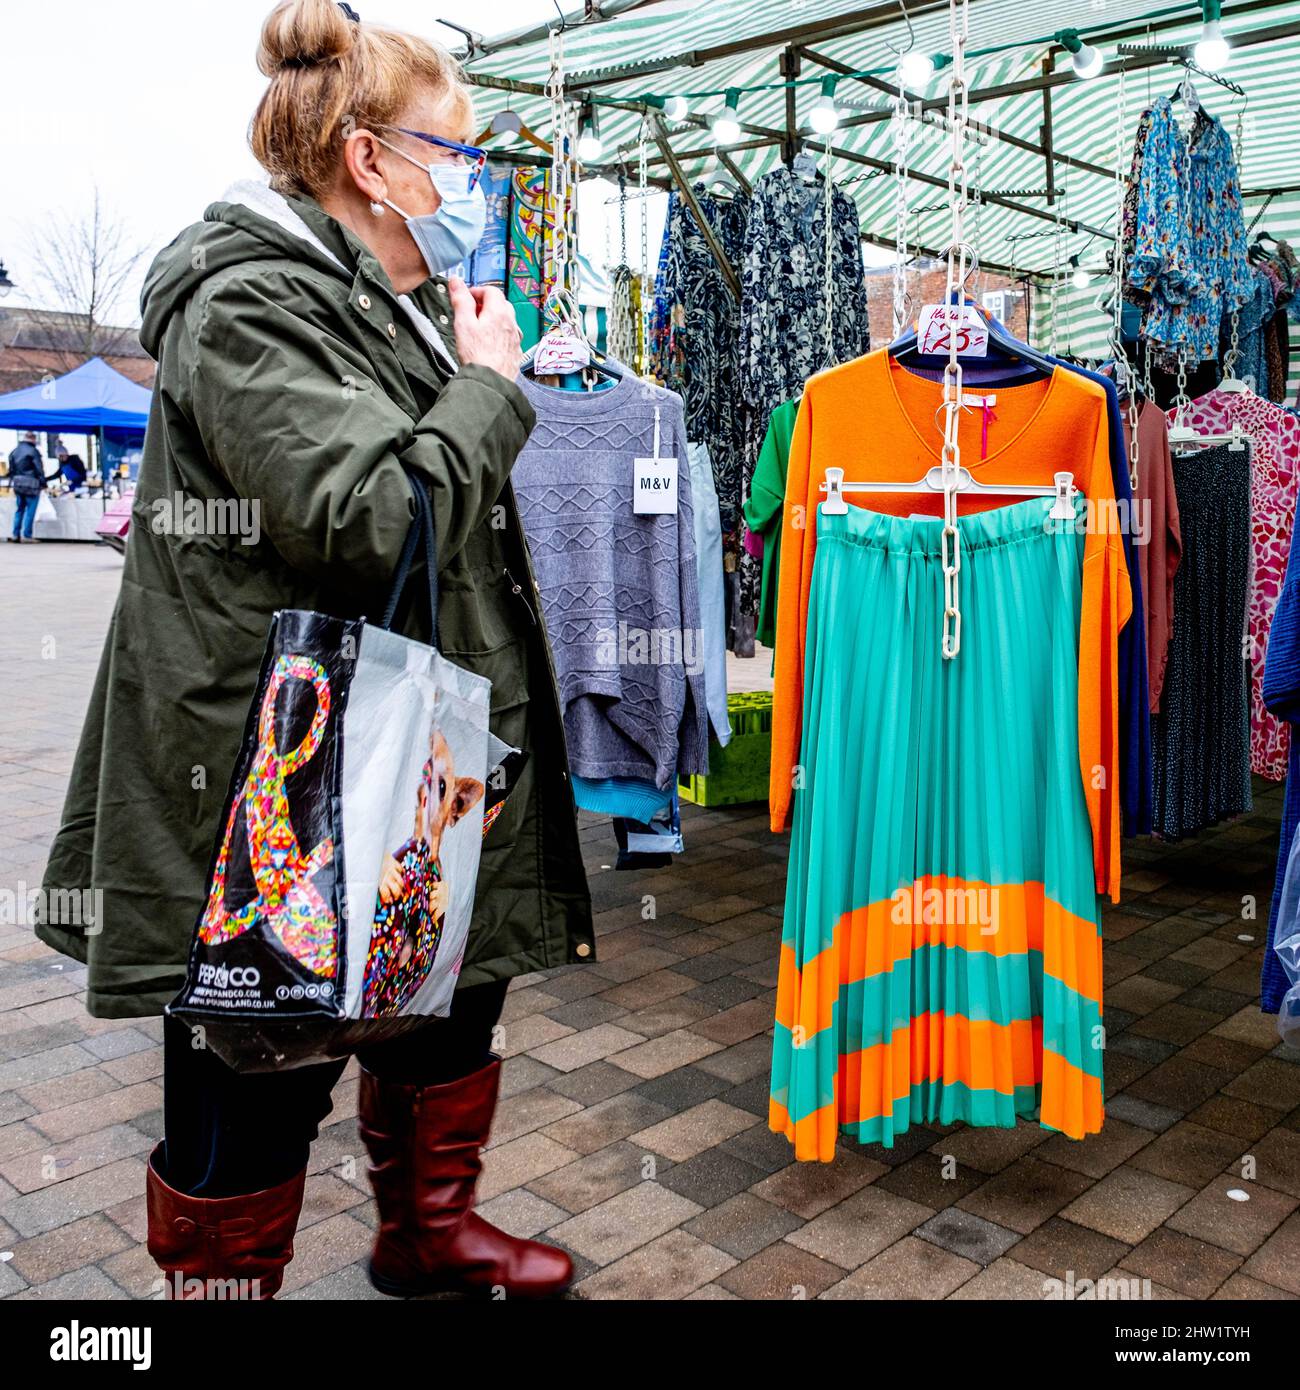 Epsom Surrey London UK, March 03 2022, Woman Standing Alone Browsing Fashion Clothing Market Stall Wearing Protactive Covid-19 Face Mask Stock Photo